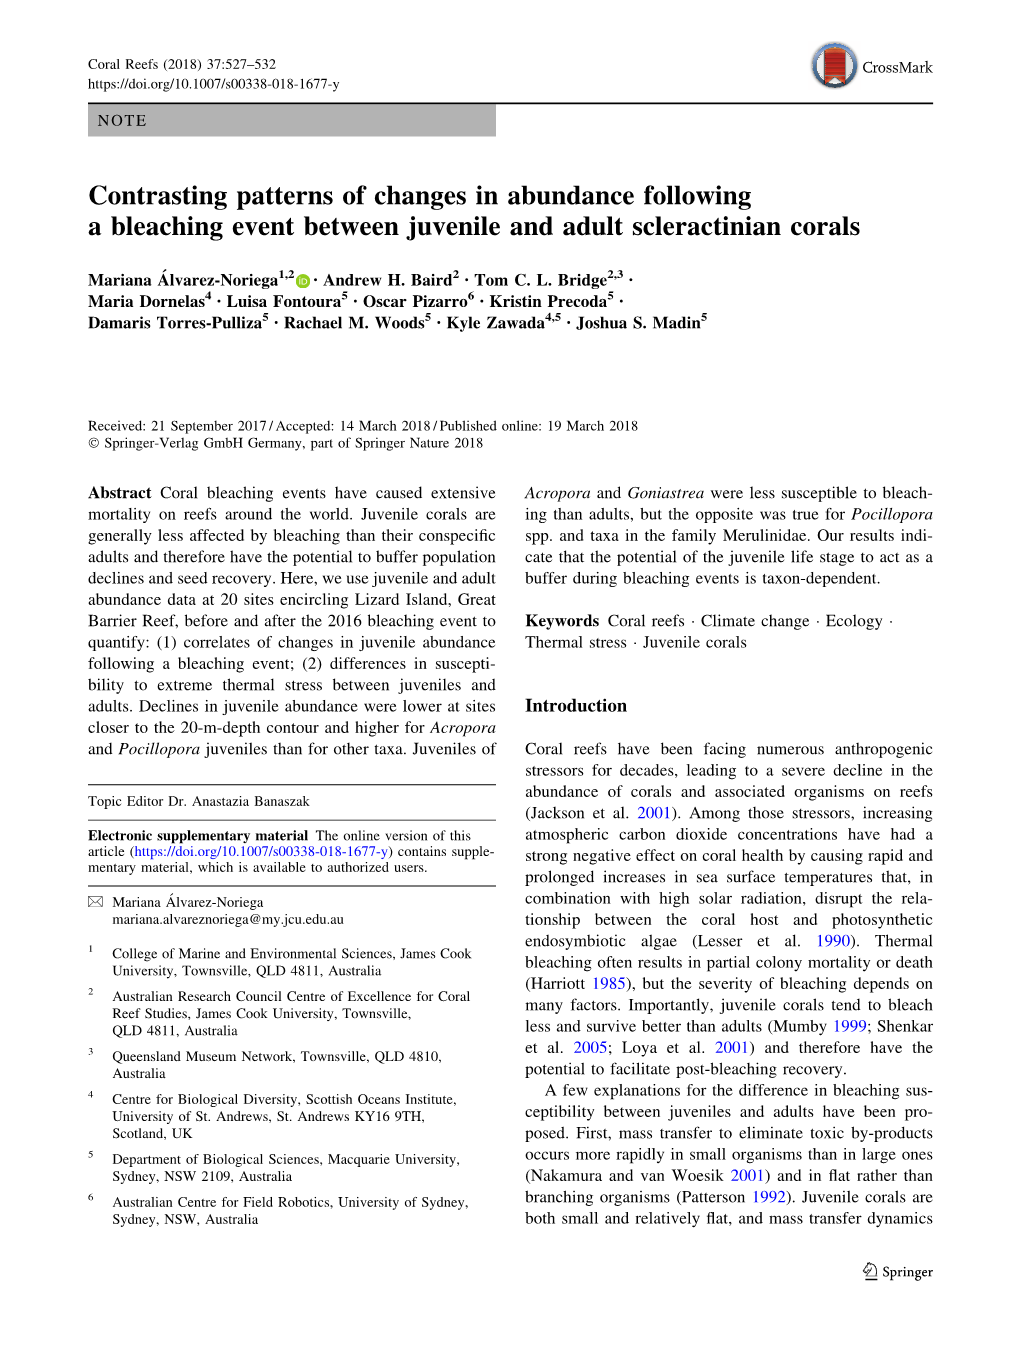 Contrasting Patterns of Changes in Abundance Following a Bleaching Event Between Juvenile and Adult Scleractinian Corals